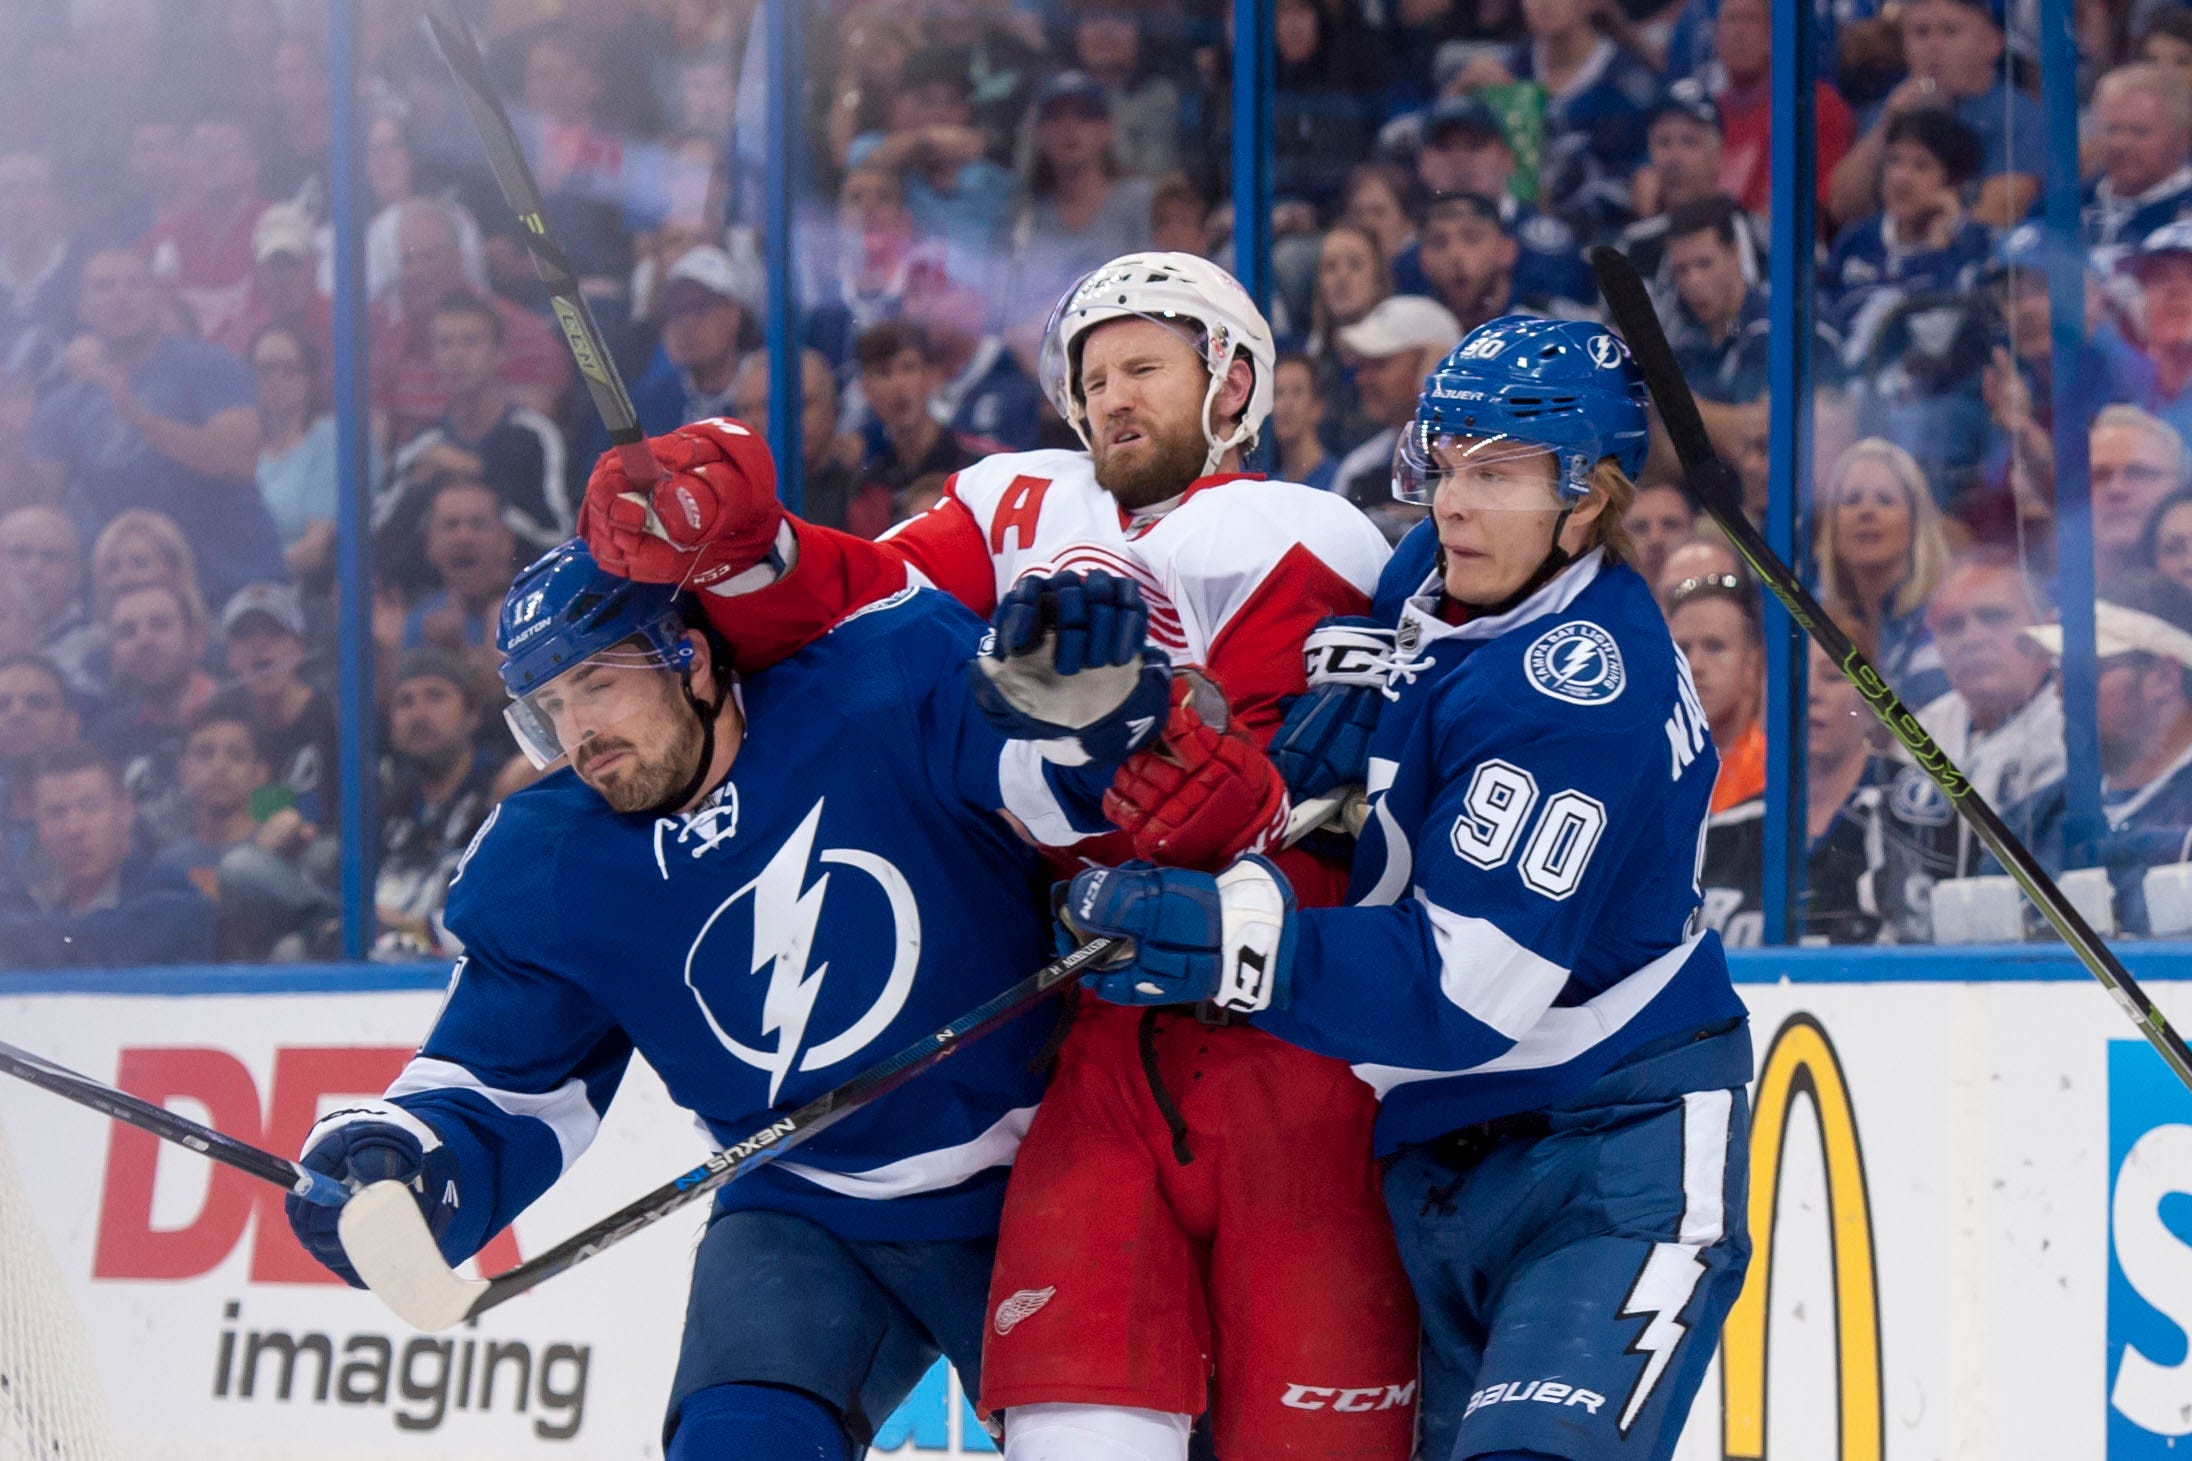 Detroit defenseman Niklas Kronwall is squeezed by Tampa Bay center Alex Killorn, left, and center Vladislav Namestnikov during Game 5 of the Eastern Conference semifinals at Amalie Arena in Tampa, Florida on April 21, 2016.